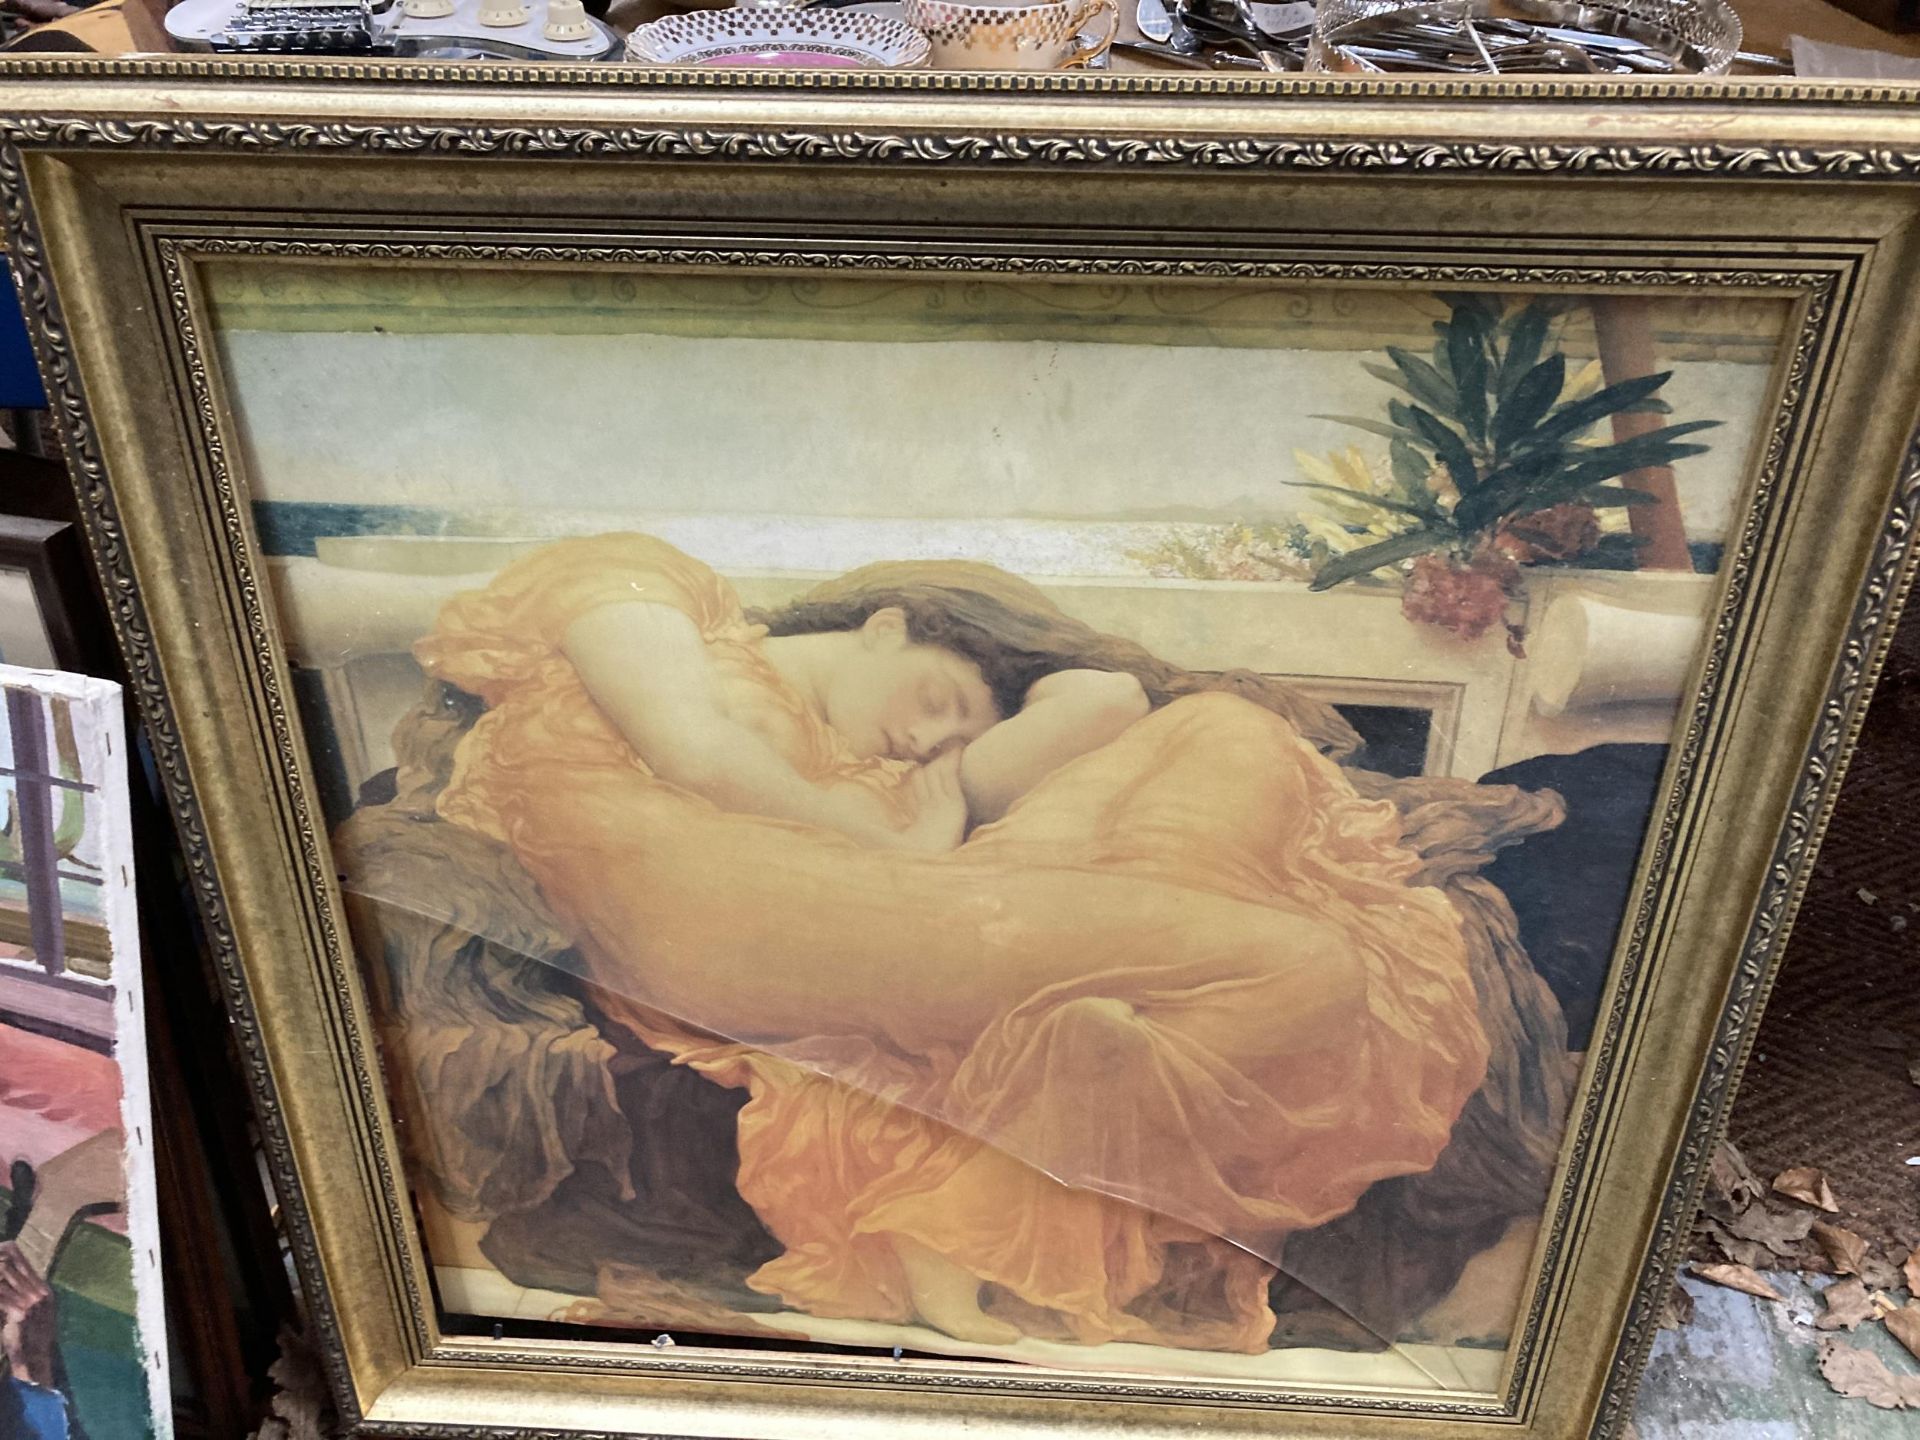 A FRAMED PRINT OF A LADY RELAXING IN AN ORNAGE DRESS (GLASS A/F)